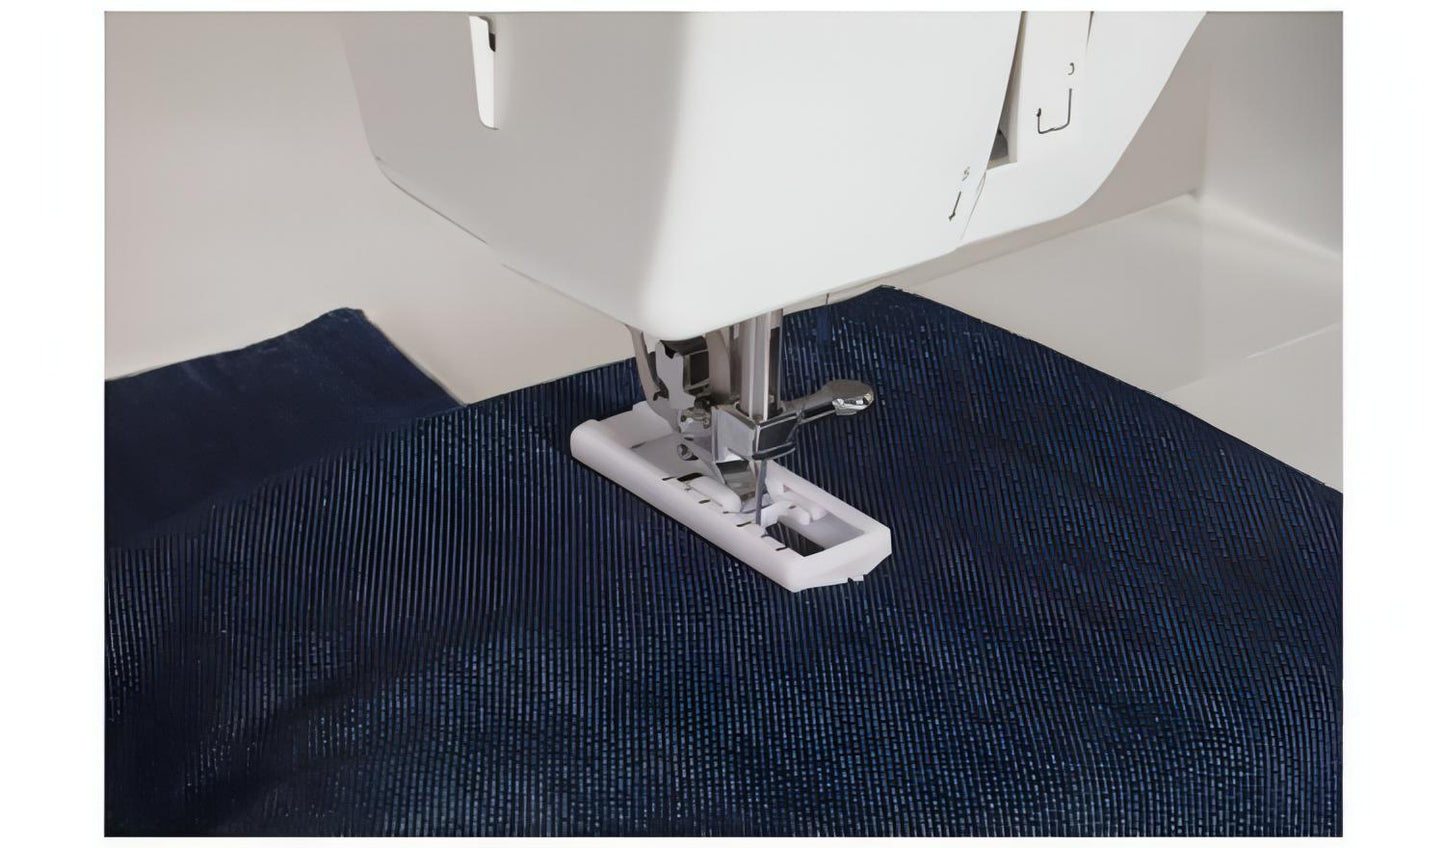 Singer Promise 1409 Sewing Machine